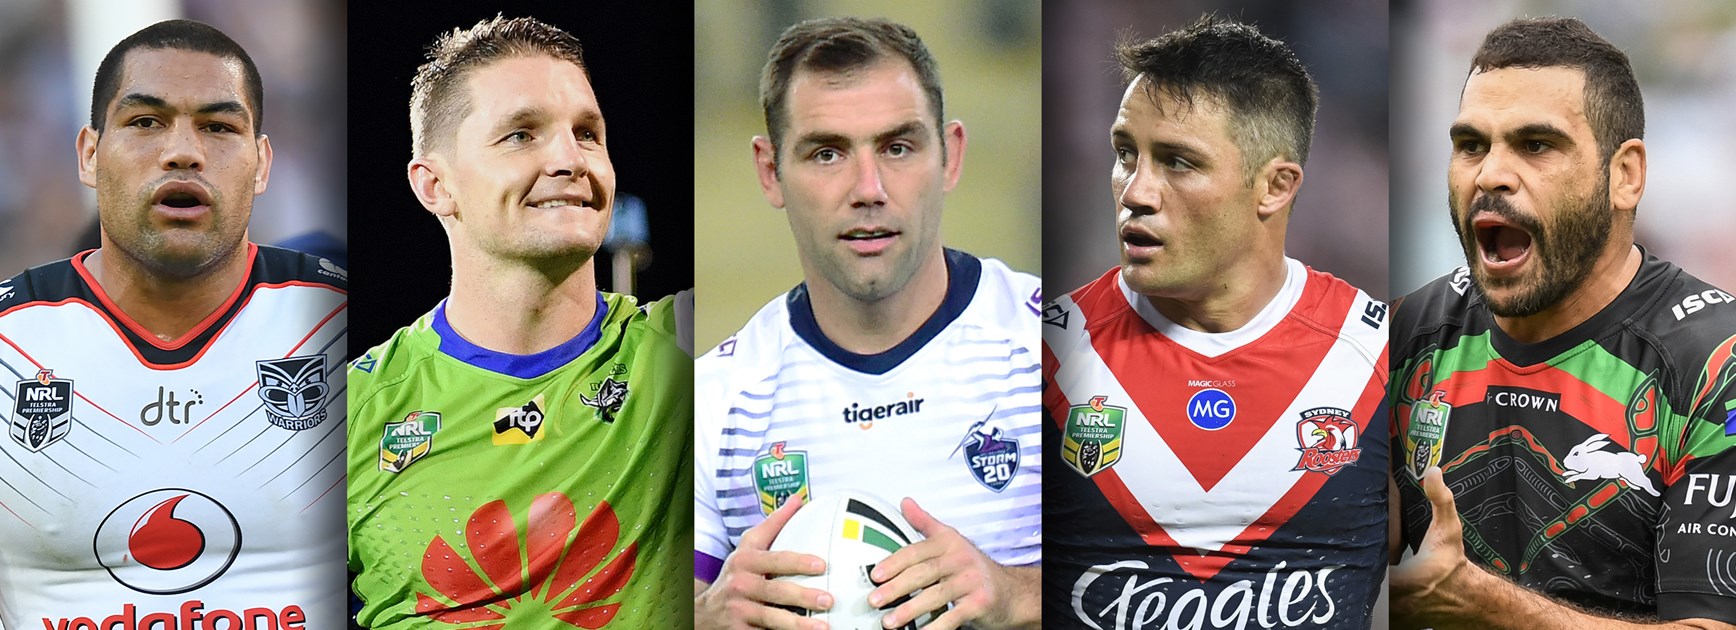 NRL milestones to watch out for in 2019